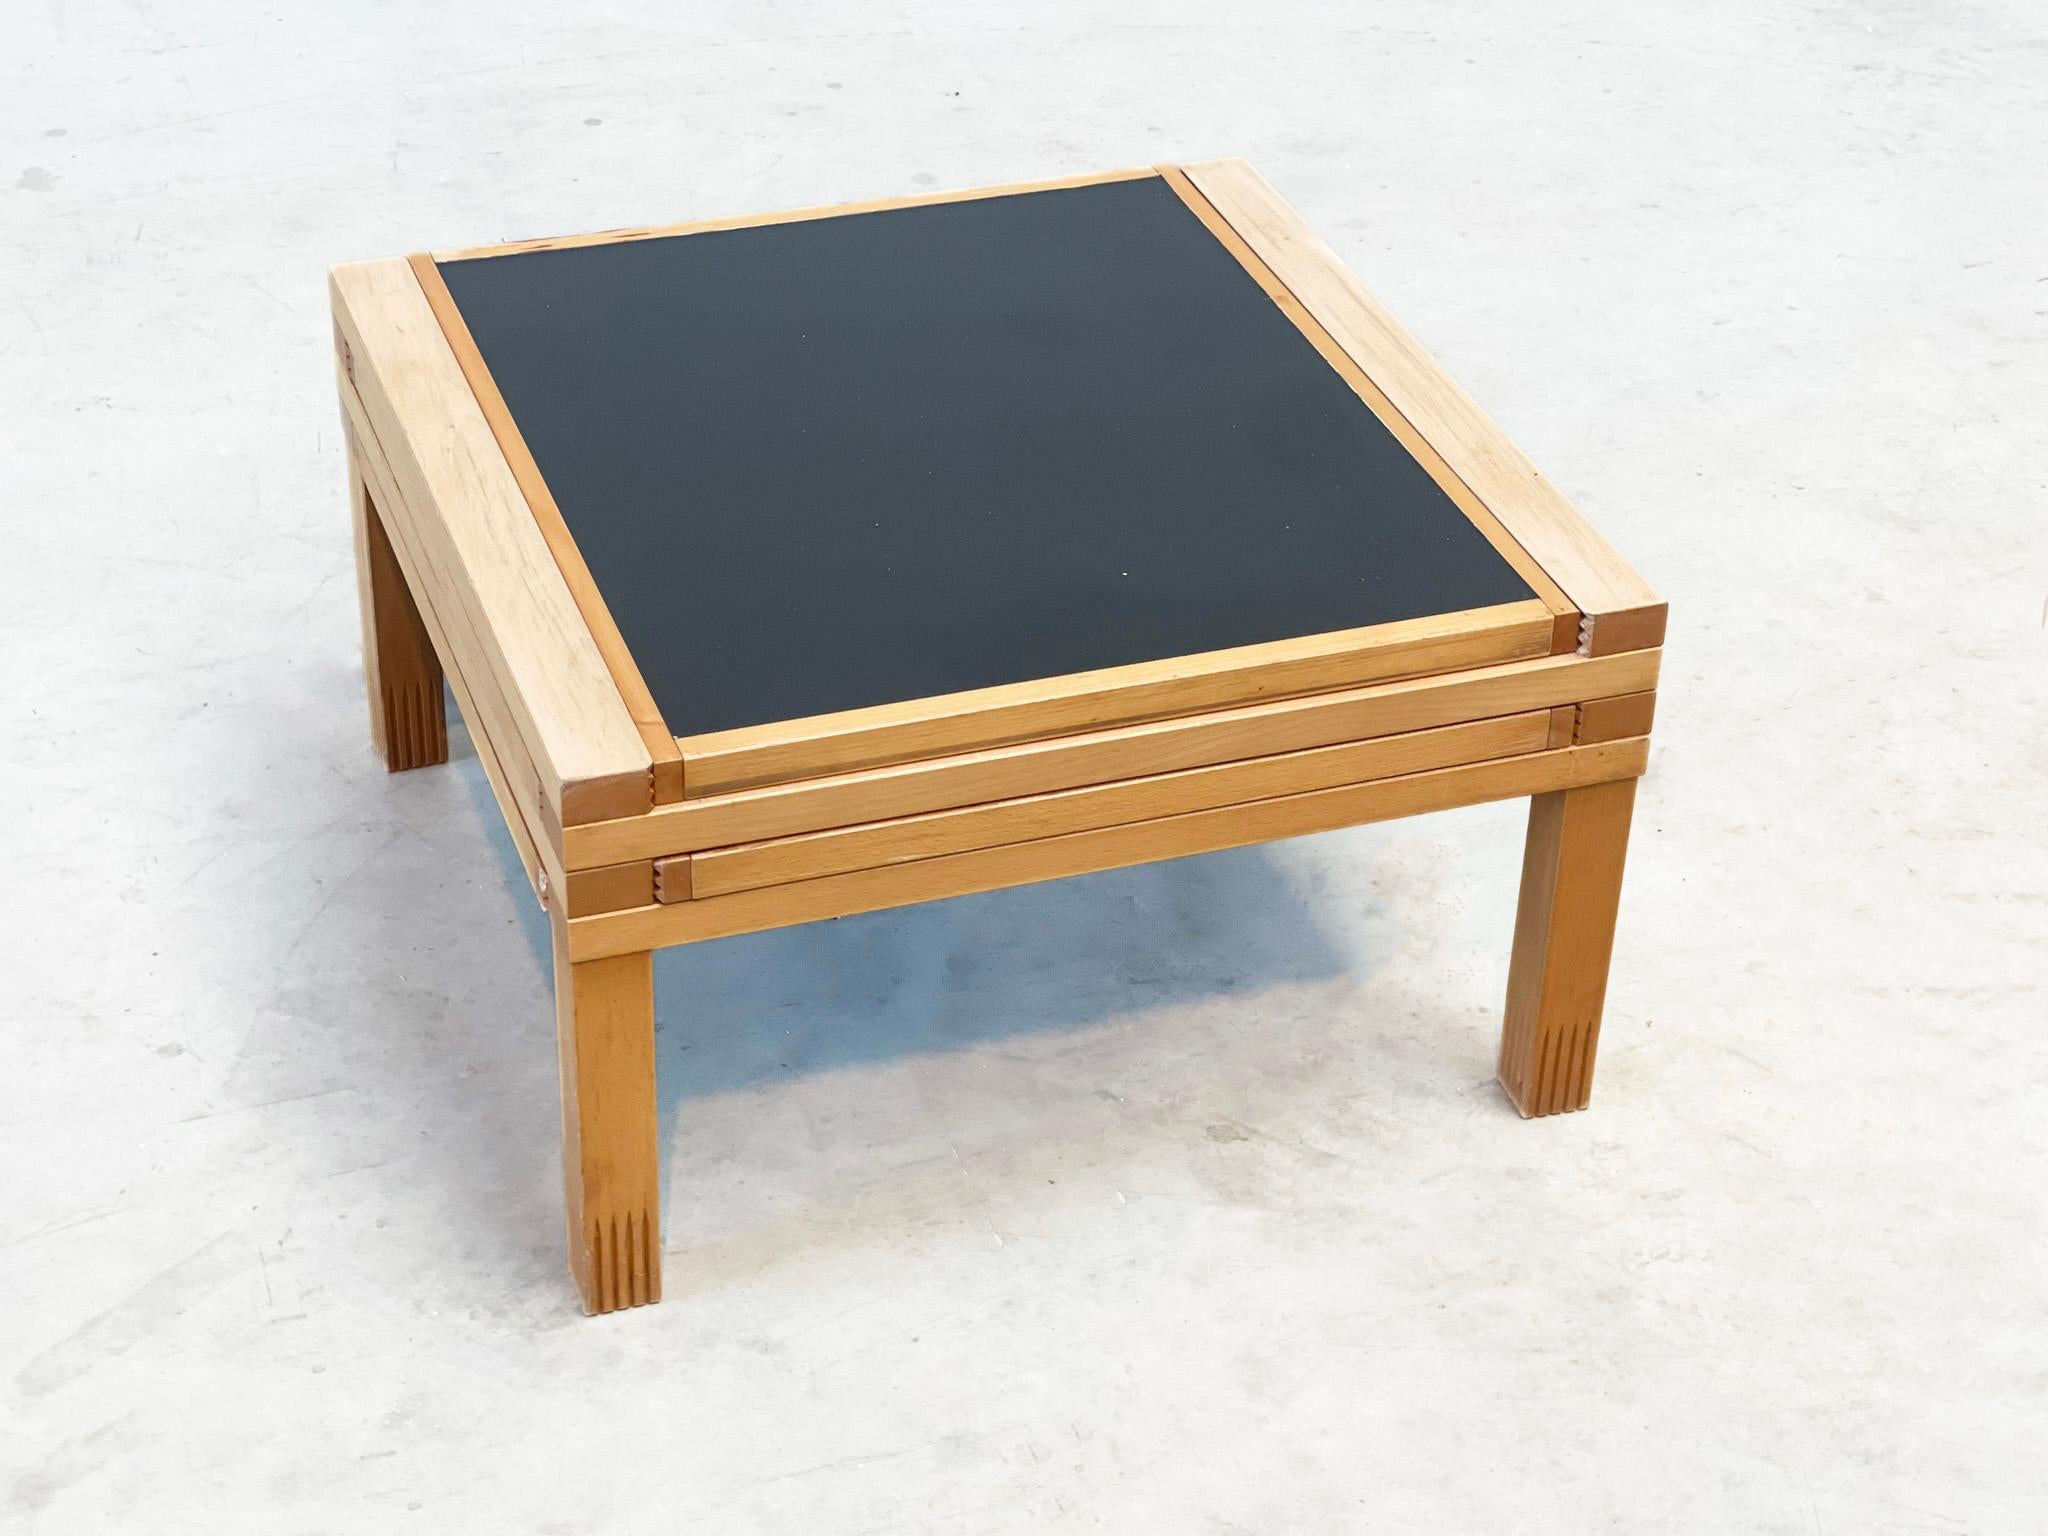 Unique coffee table produced by Bellato International srl and designed by Bernard Vuarnesson in the 80s. The table is very useful because of the four extendable tops with laminated tops in black, which can be placed in different positions. The frame